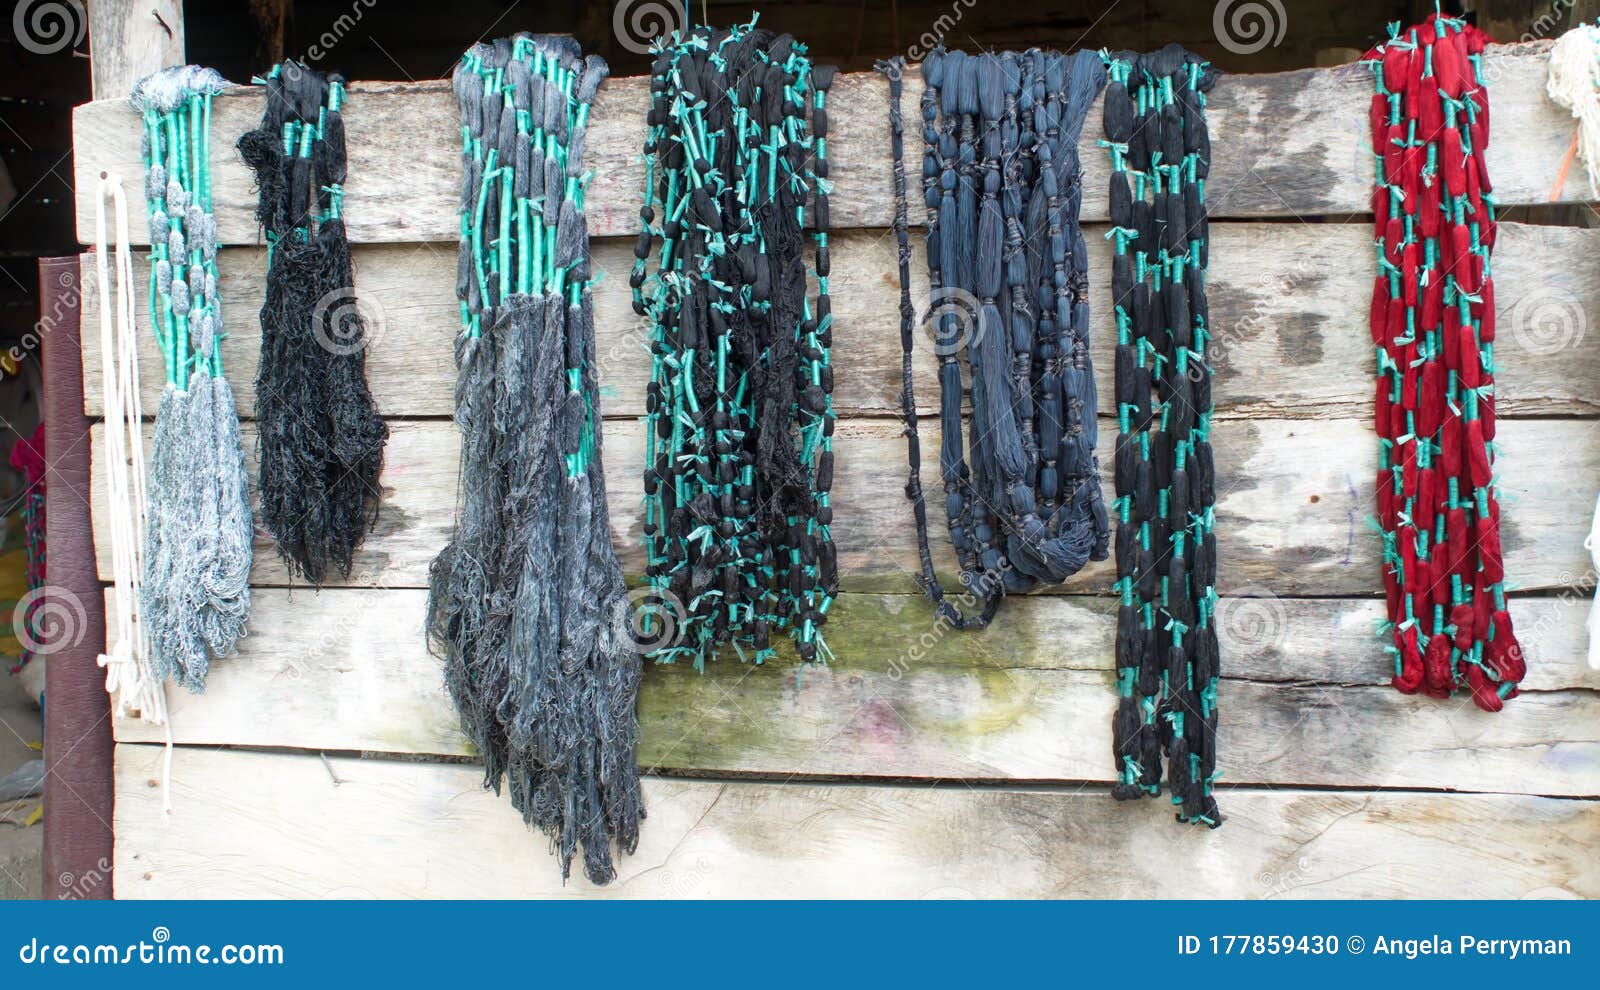 dyed ikat thread hanging to dry